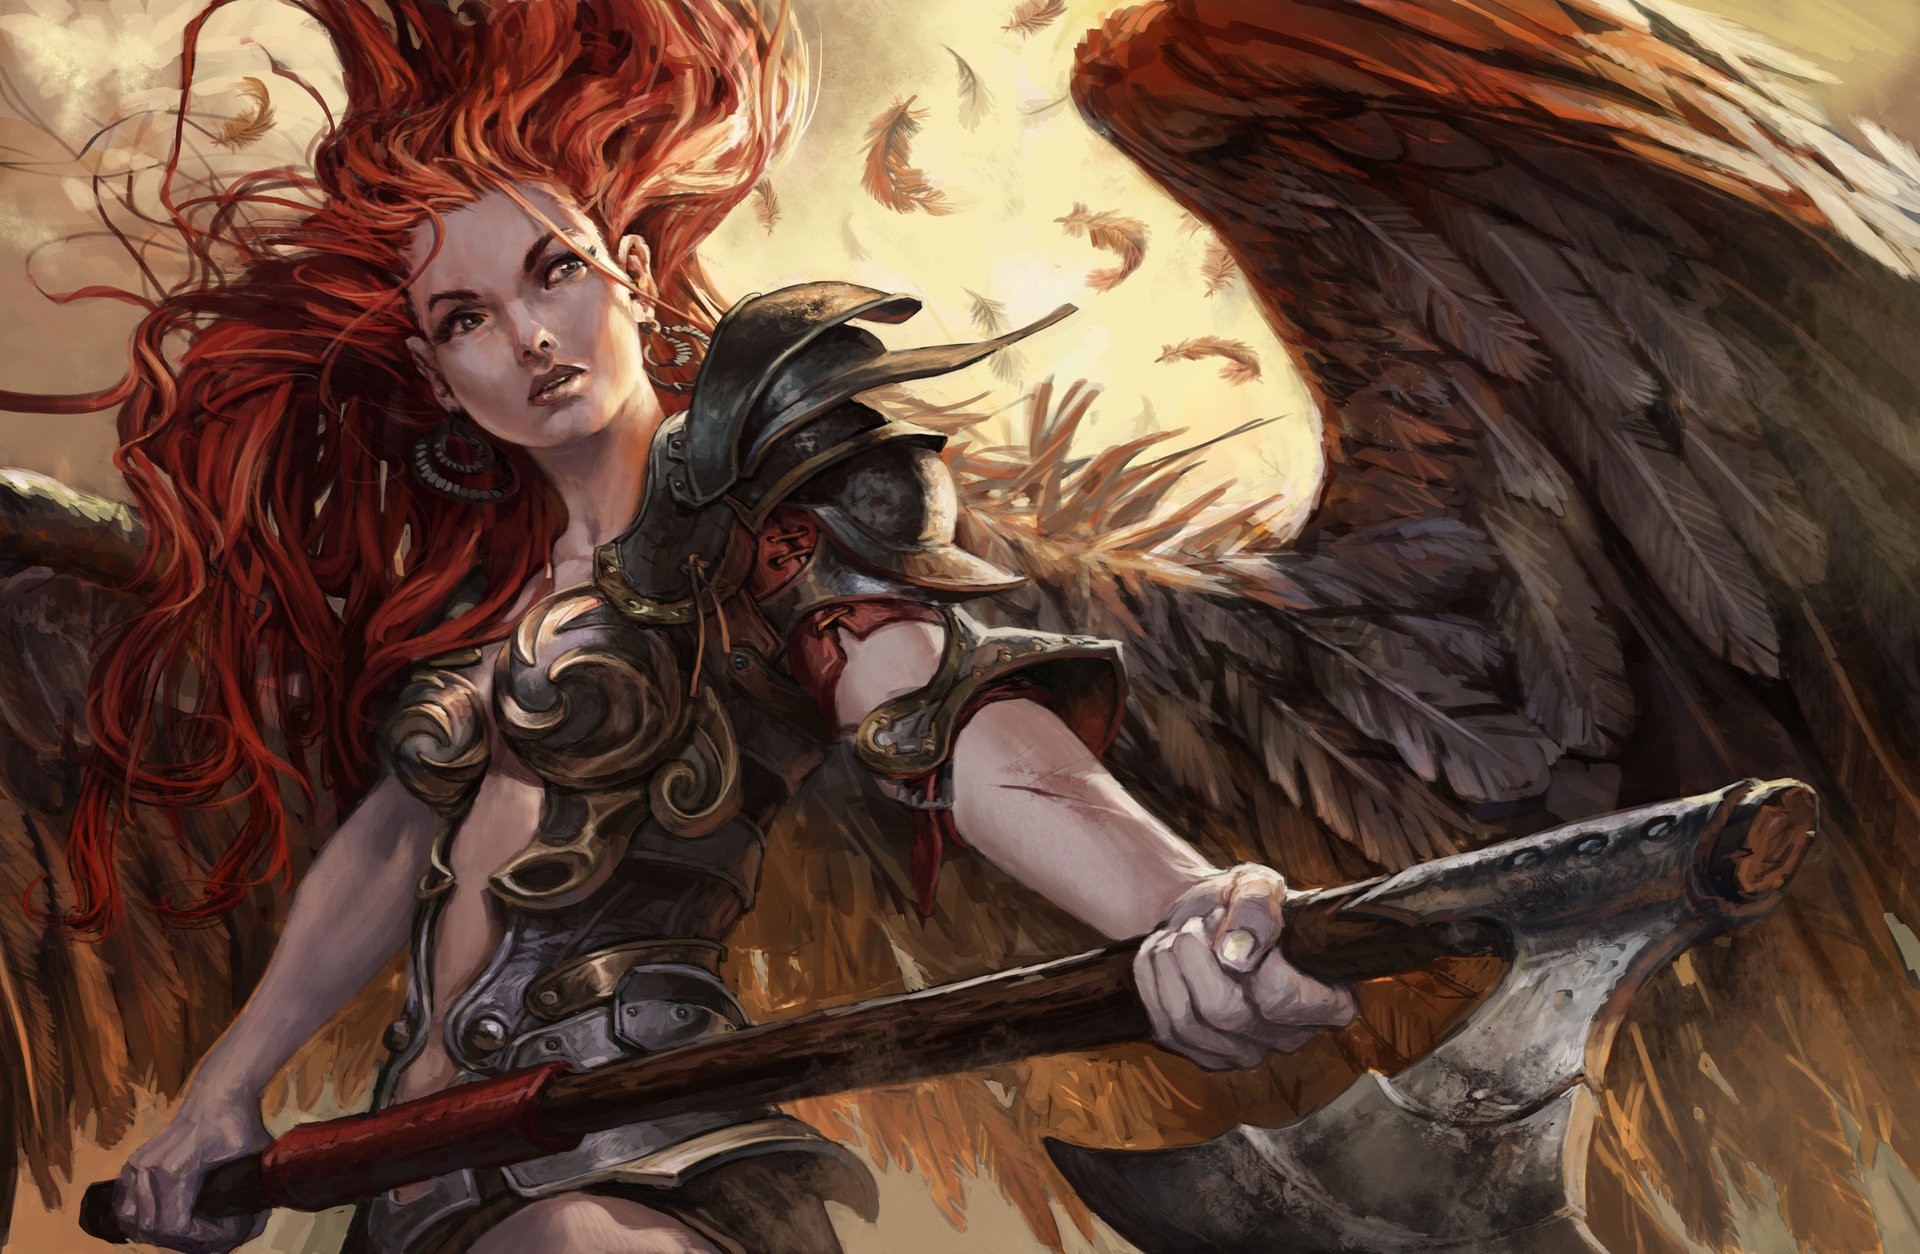 General 1920x1254 warrior angel fantasy art axes redhead armor wings figure-hugging armor low-angle